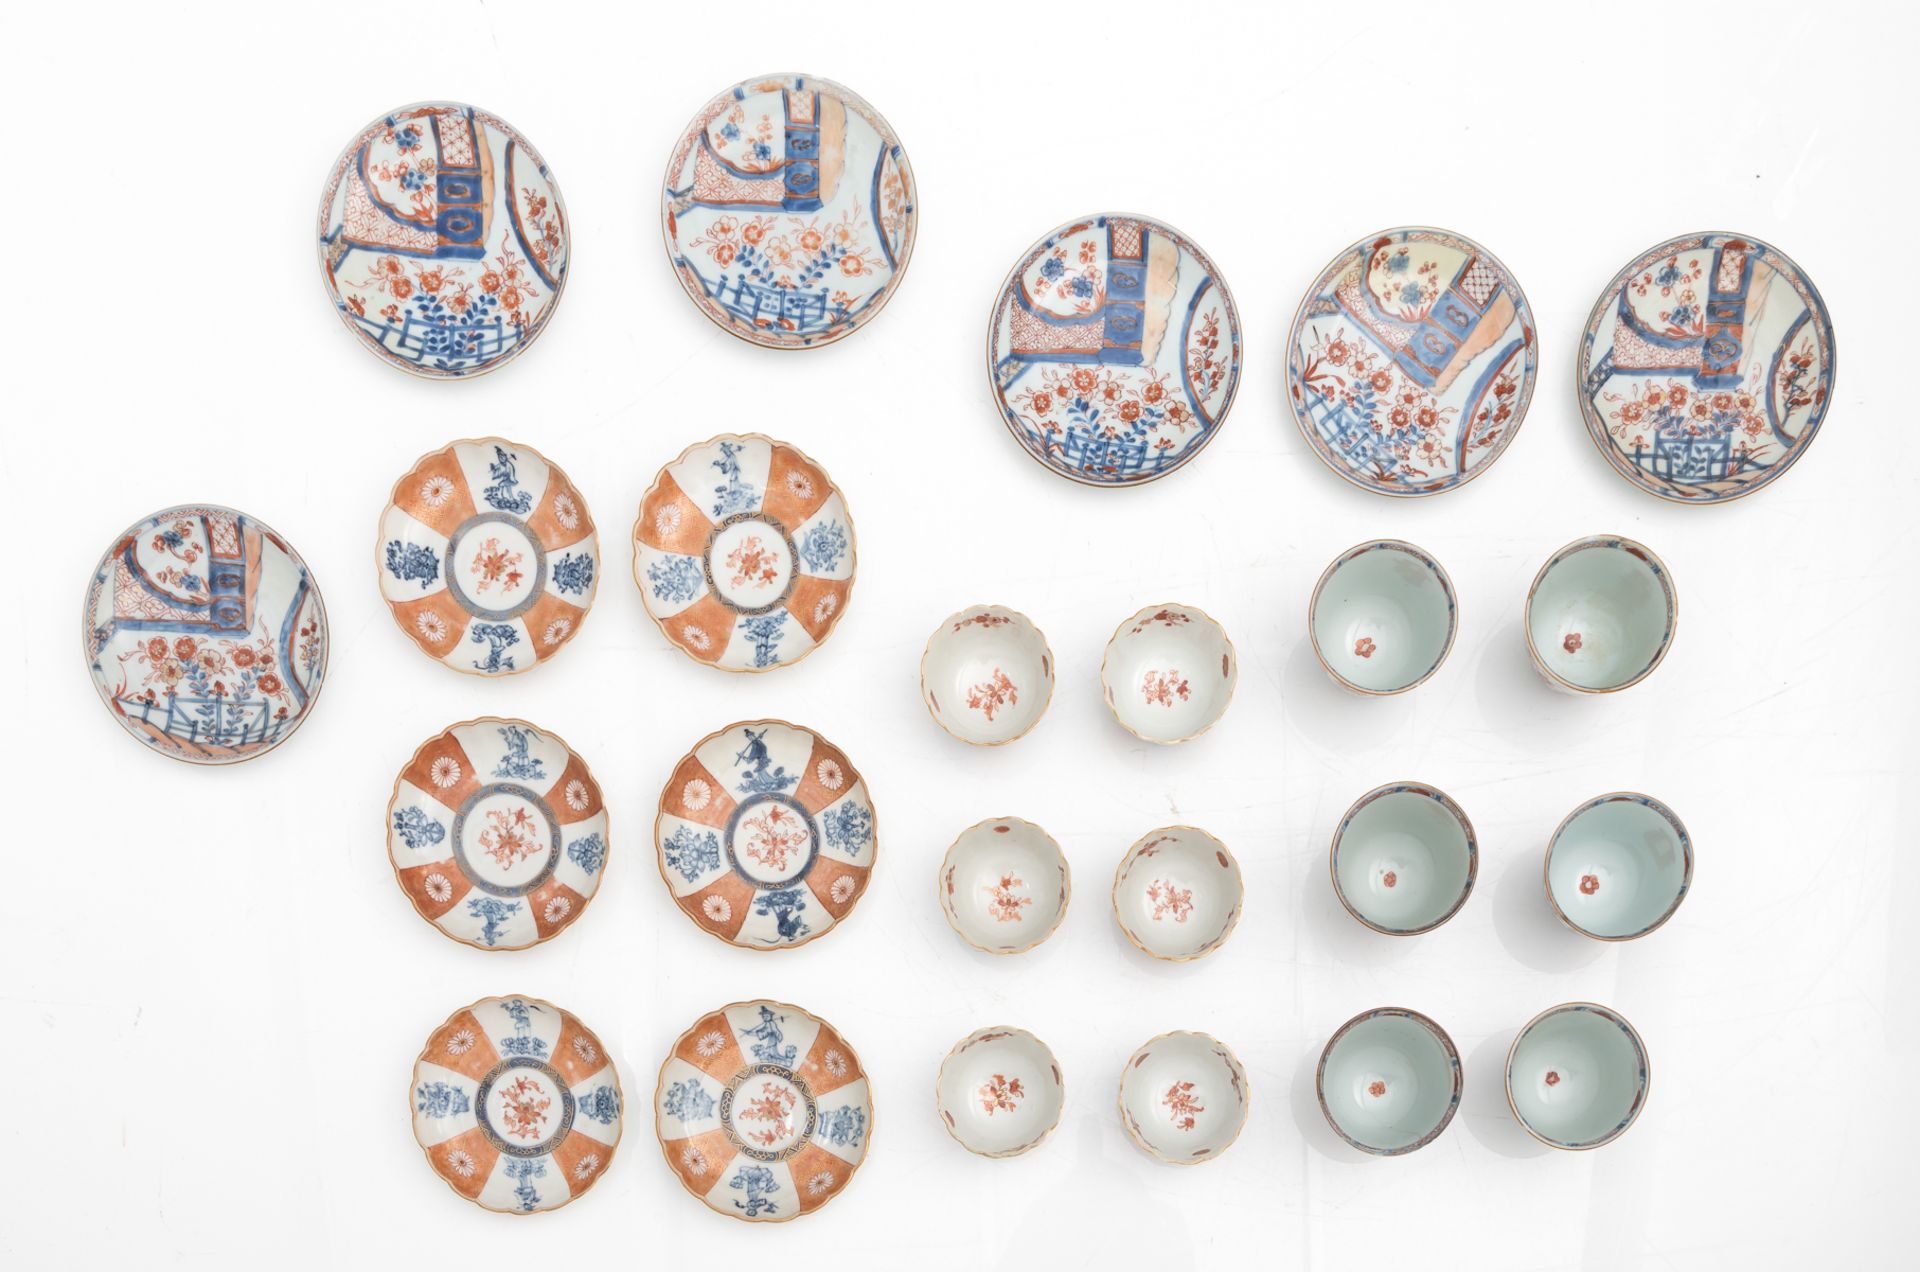 A lot of two Chinese Imari cup and saucer services, Yongzheng - Qianlong (ca 1730-1740), H 4-7 - ø 1 - Image 10 of 13